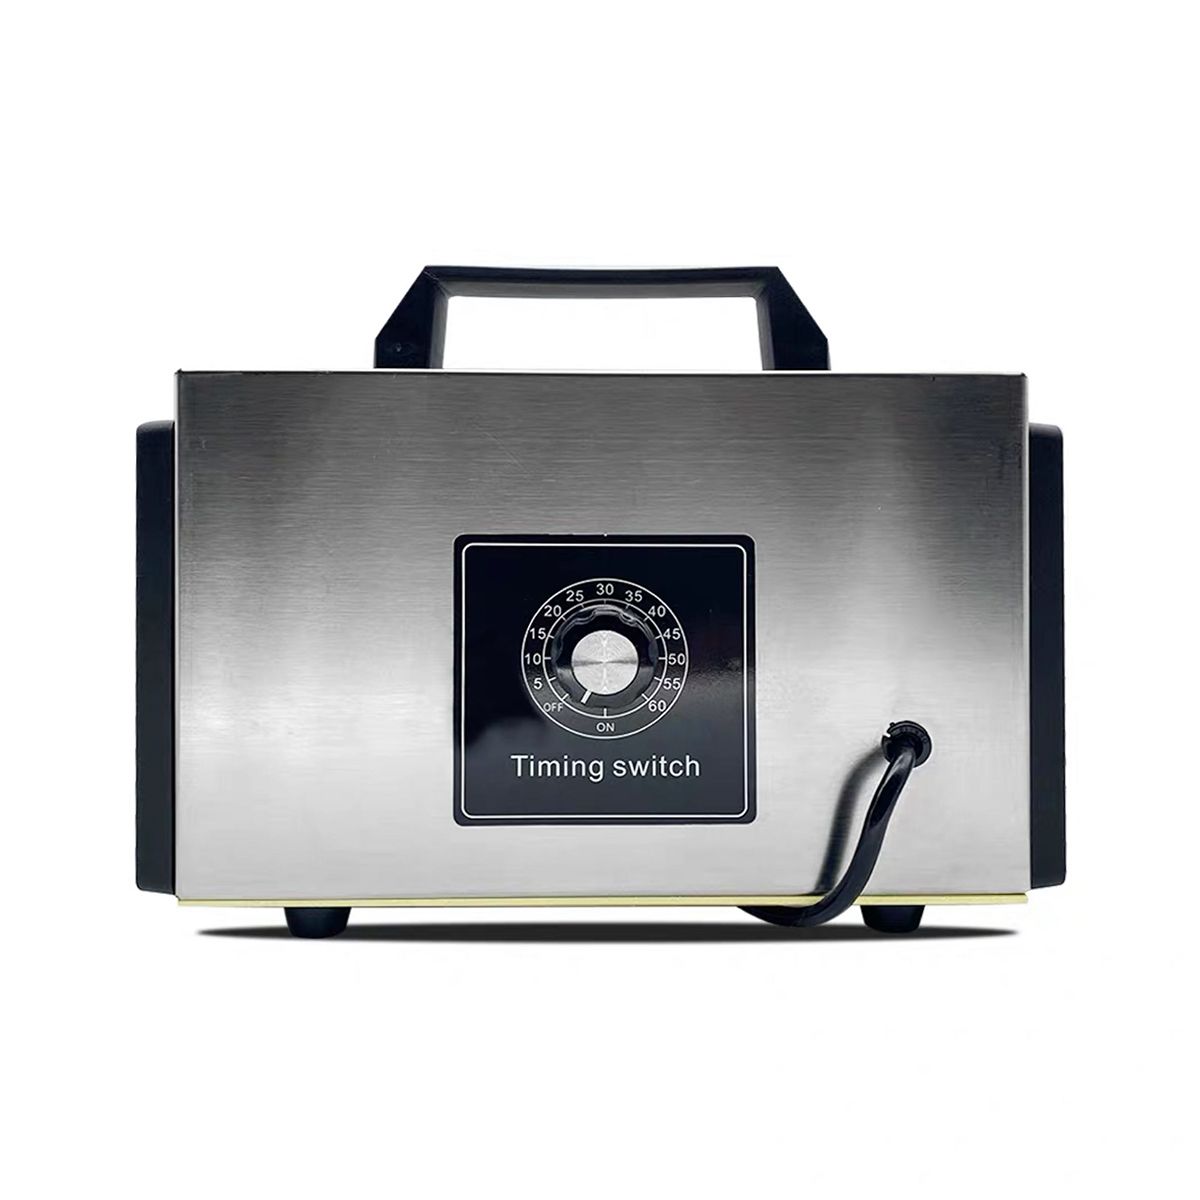 220V-Home-Ozone-Generator-Air-Purifier-Portable-Ozone-Machine-with-Timing-Switch-1698486